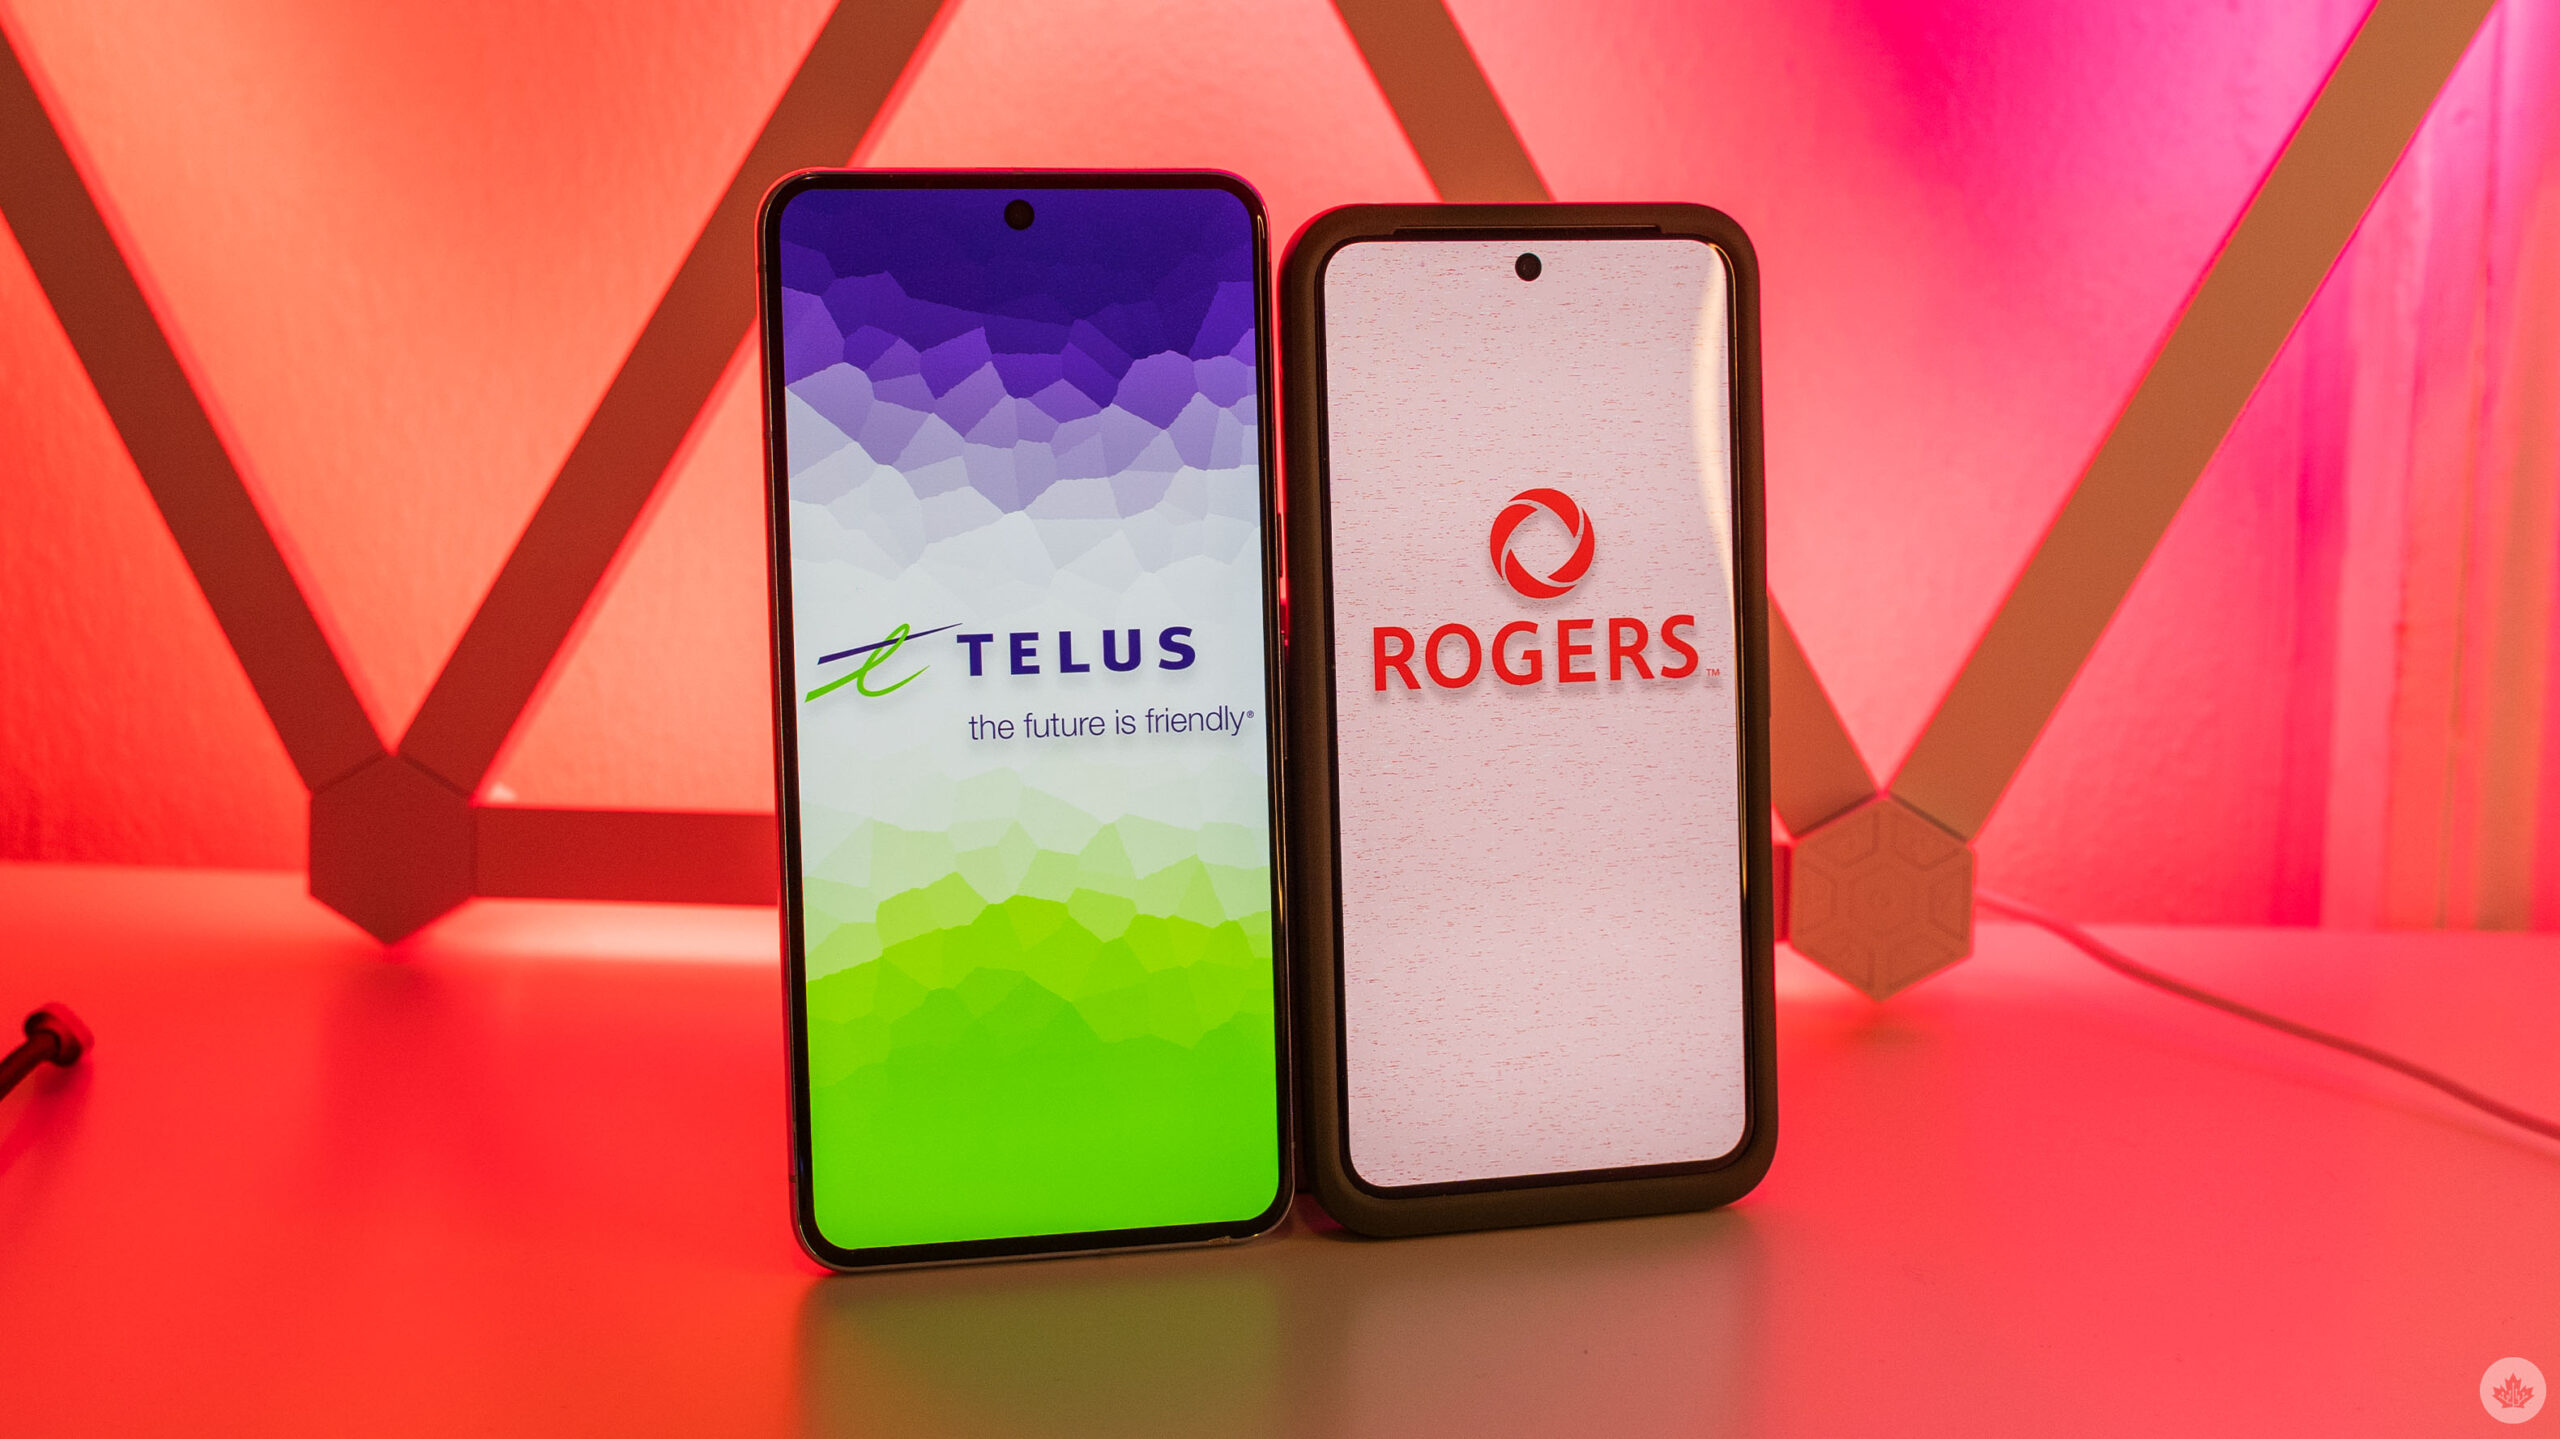 Telus and Rogers logos on smartphones.